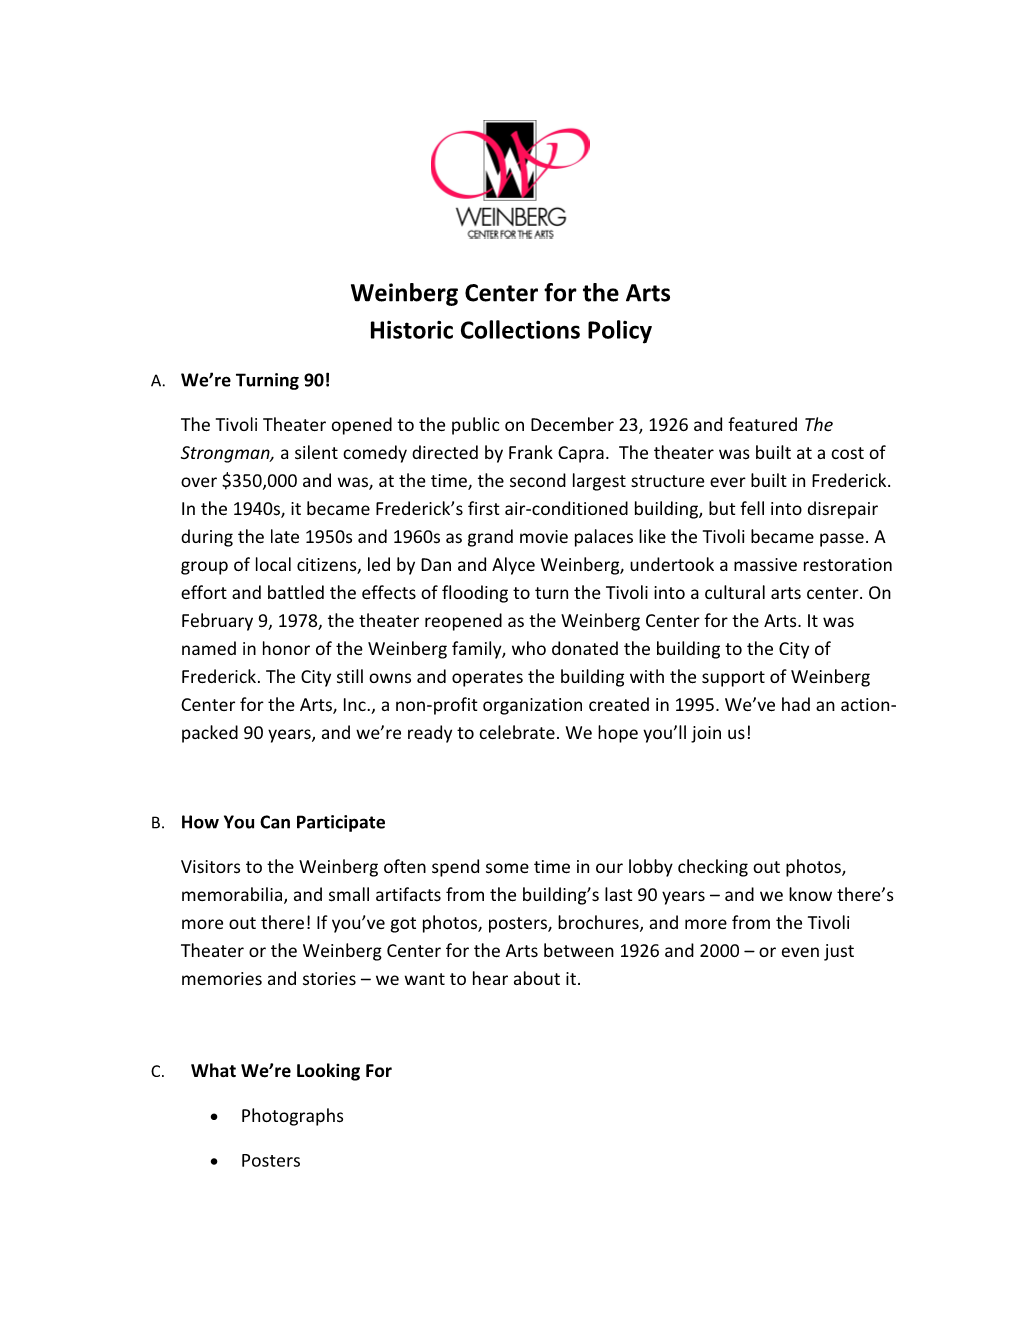 Weinberg Center for the Arts Historic Collections Policy